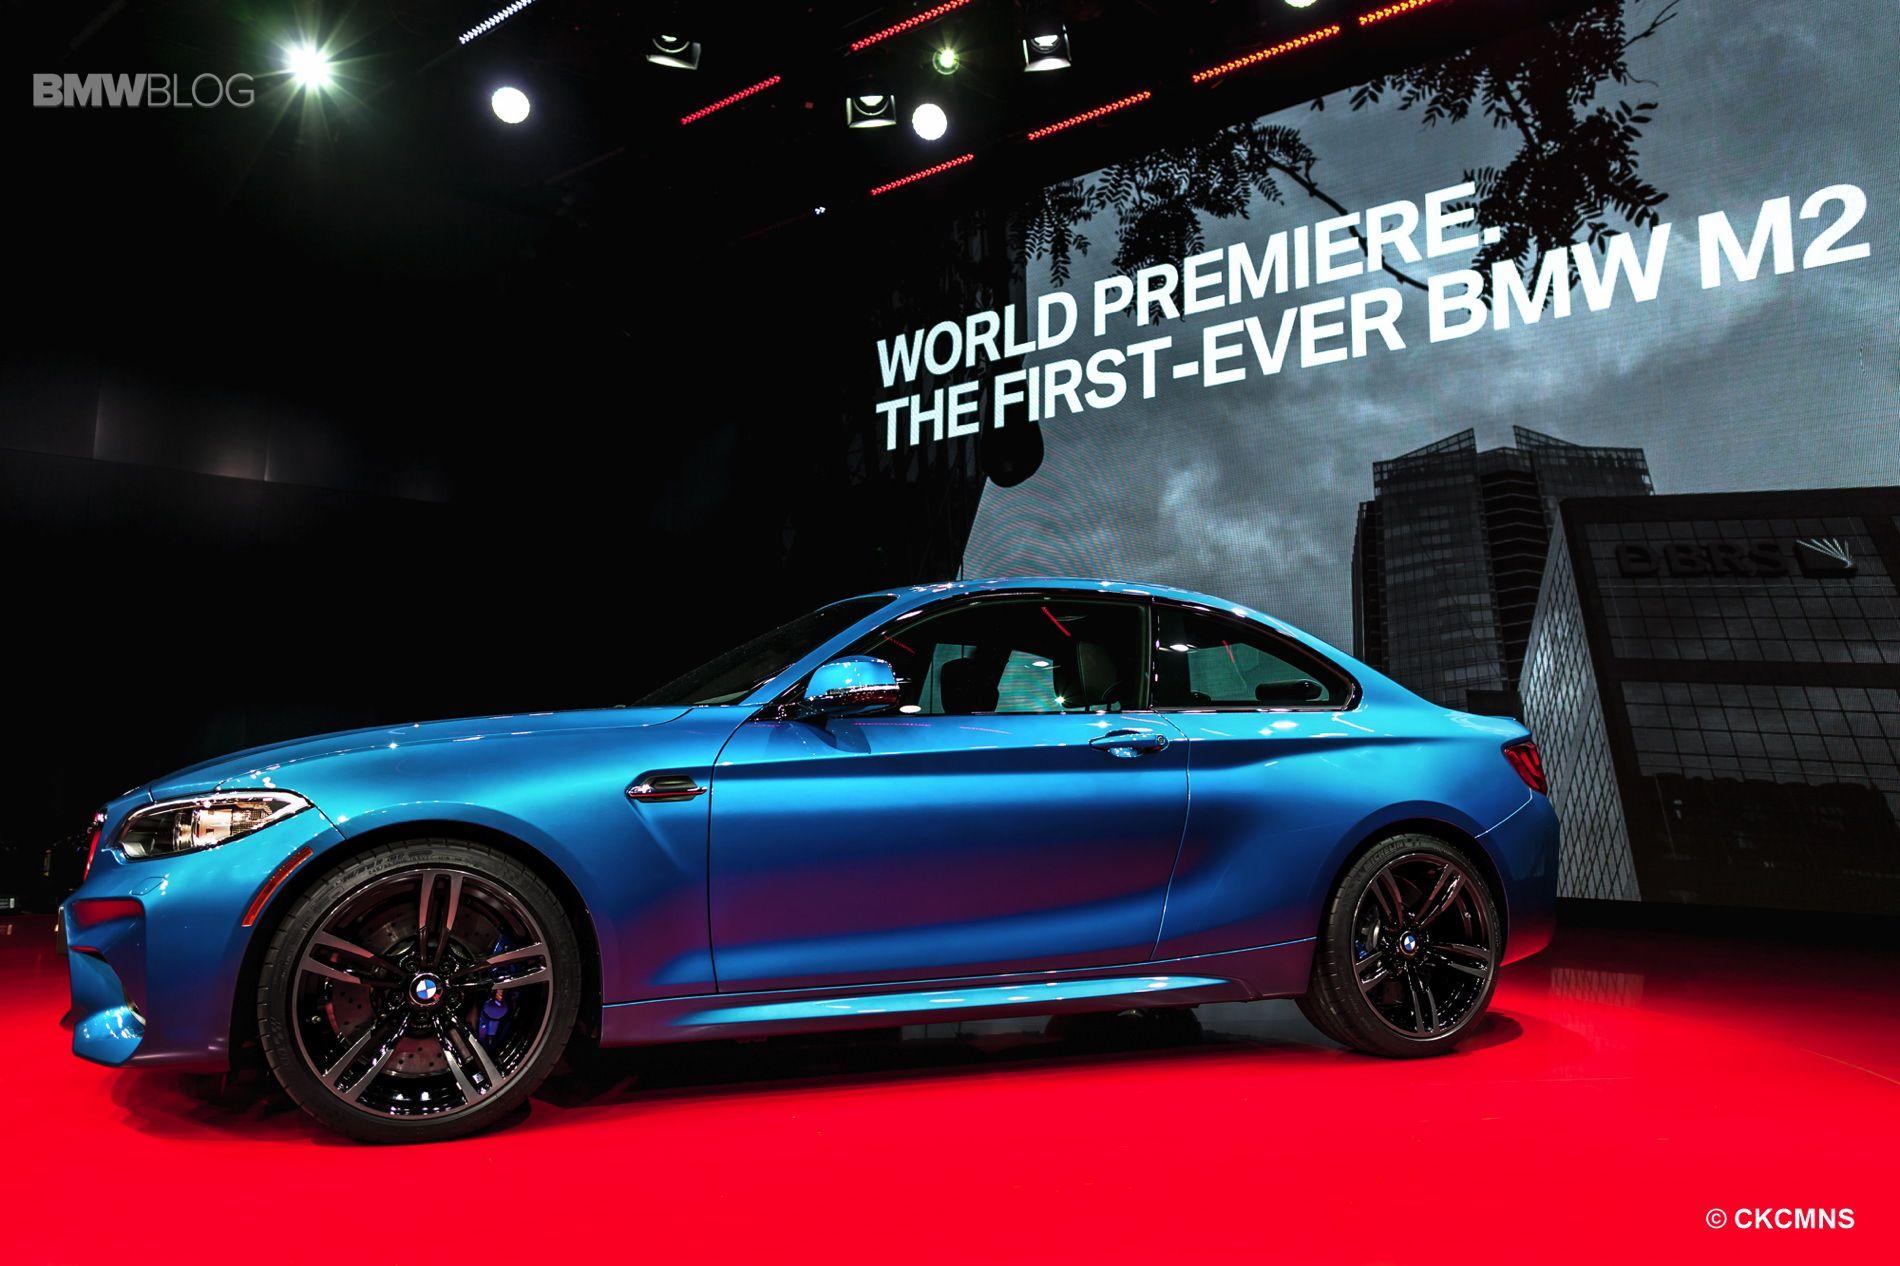 Download our BMW M2 wallpaper from the 2016 Detroit Auto Show